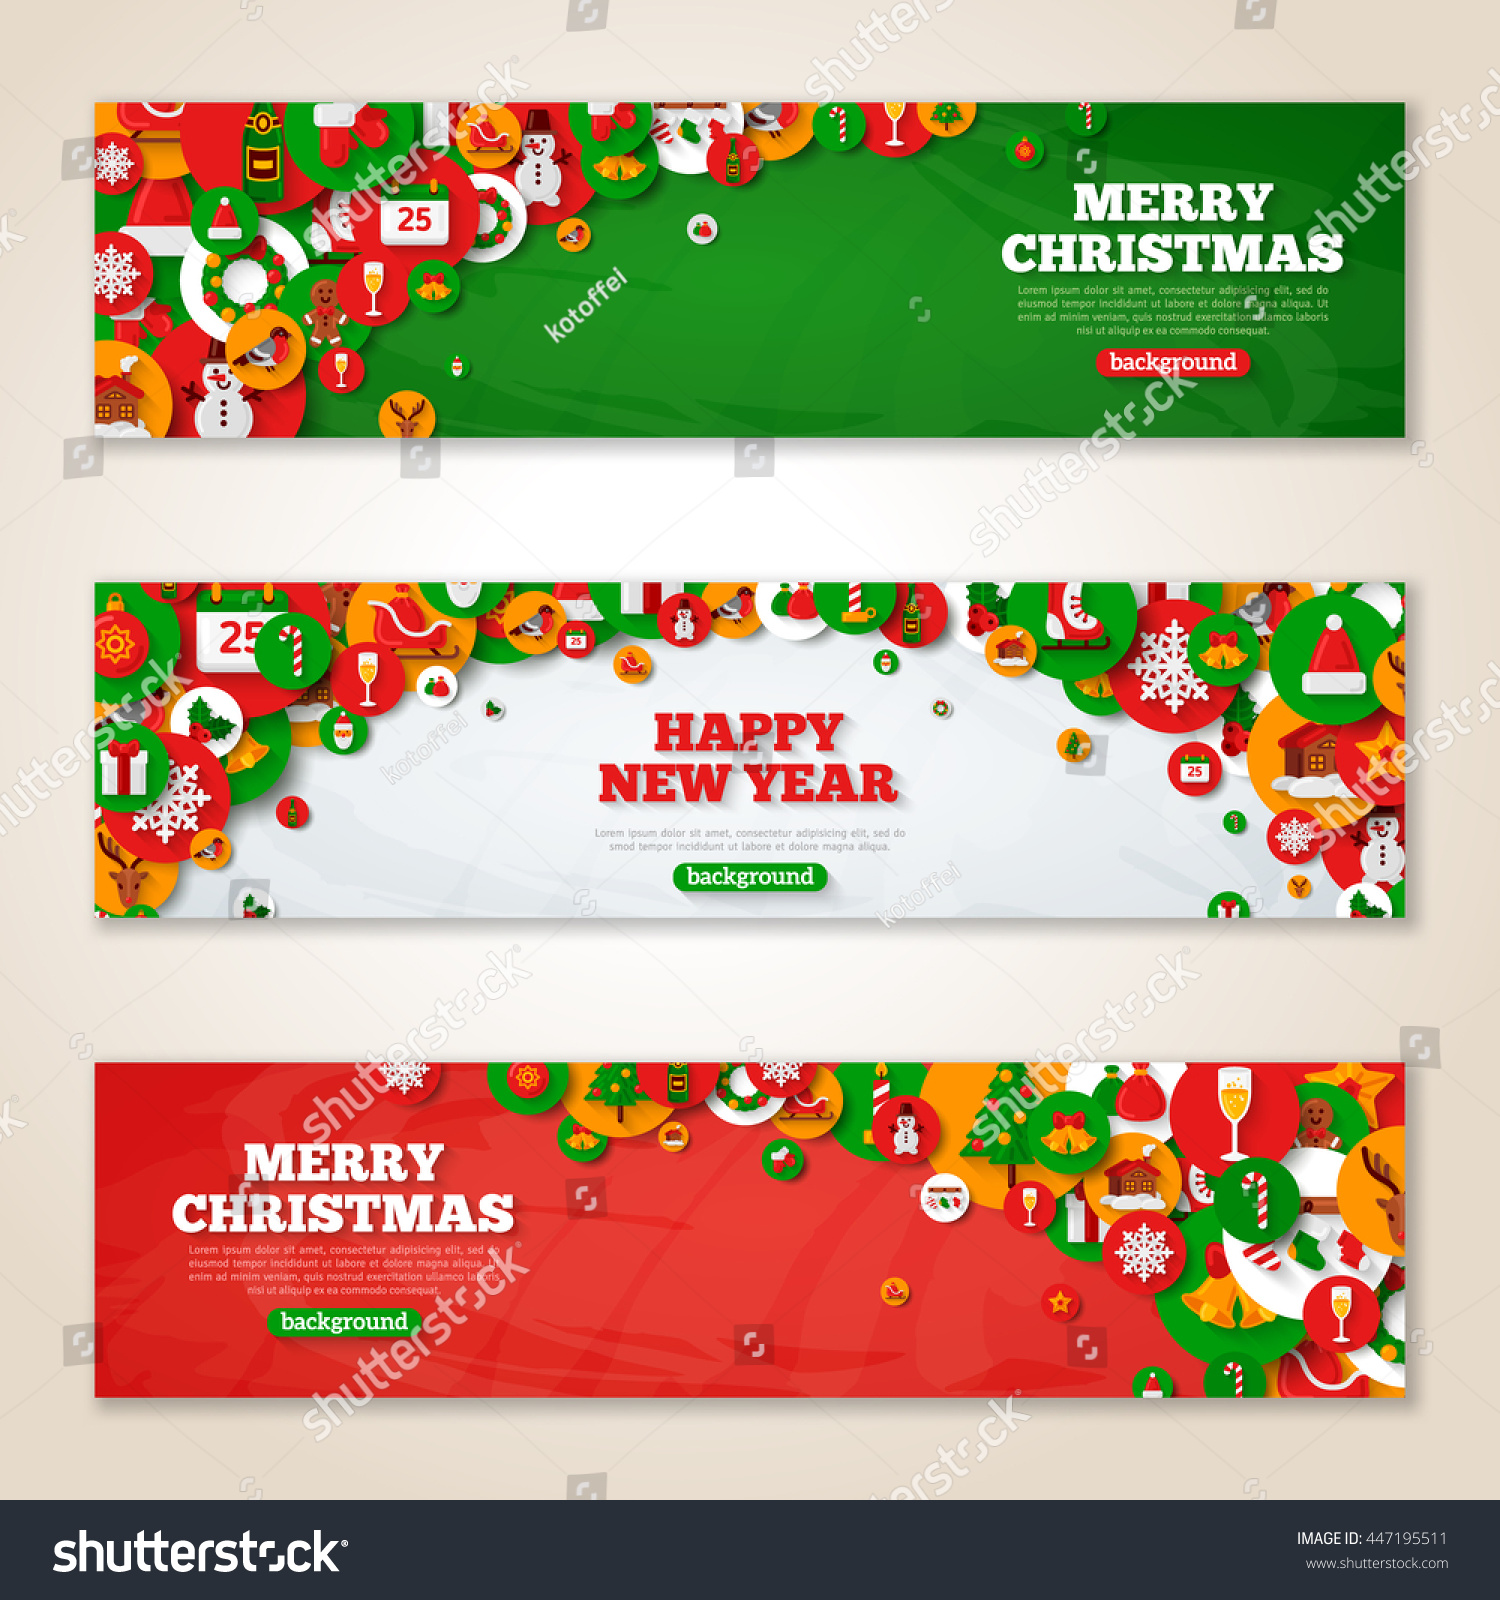 Set of horizontal Christmas banners with flat holiday icons in circles Vector illustration New